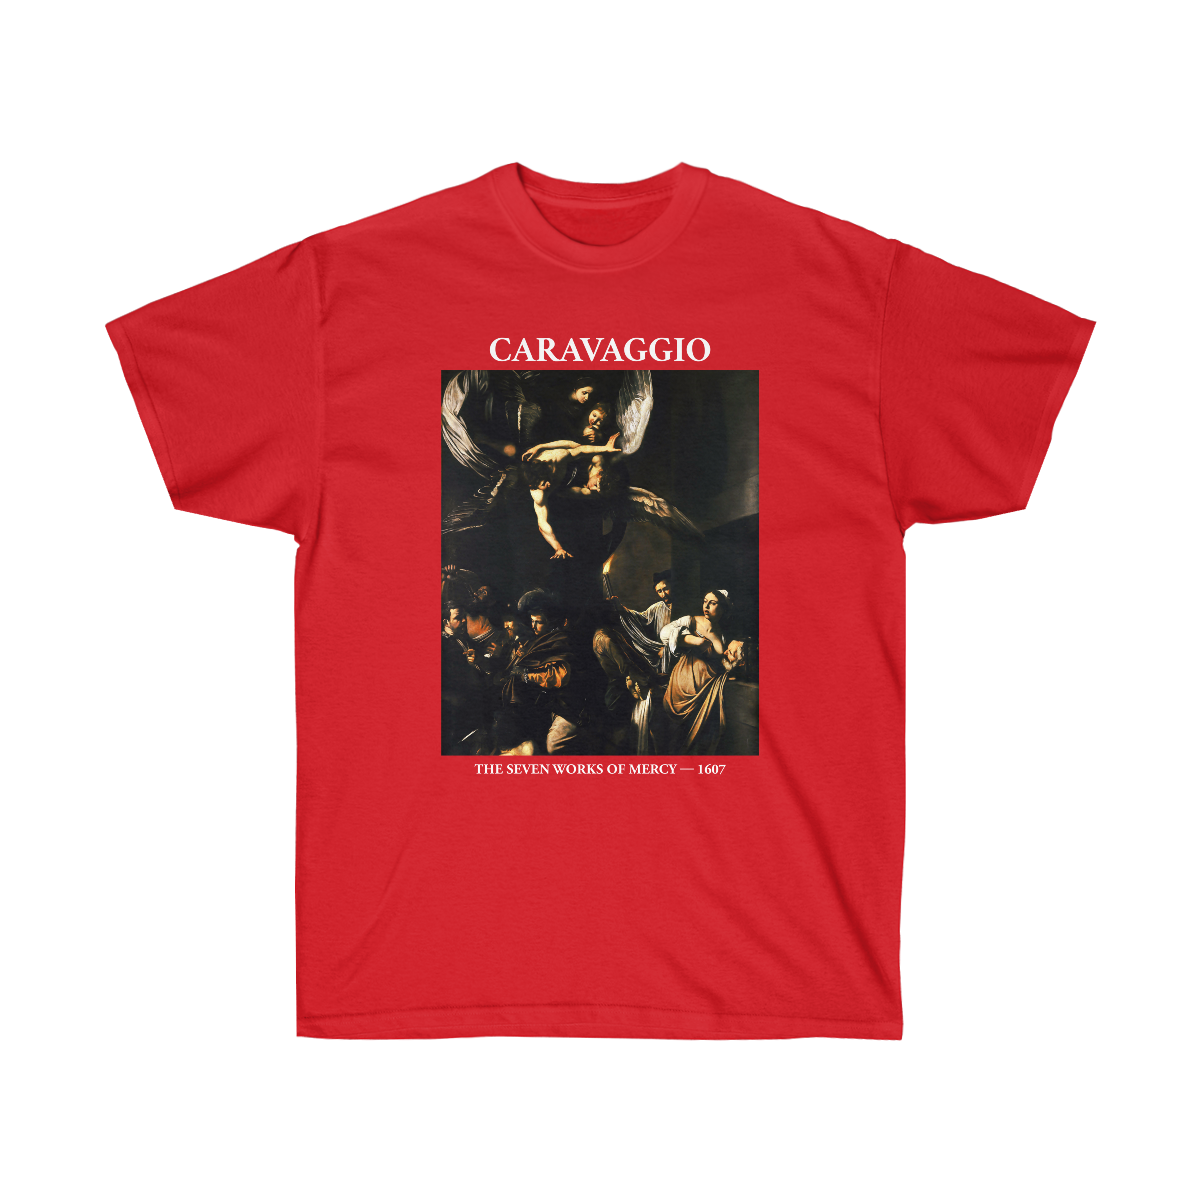 The Seven Works of Mercy T-shirt